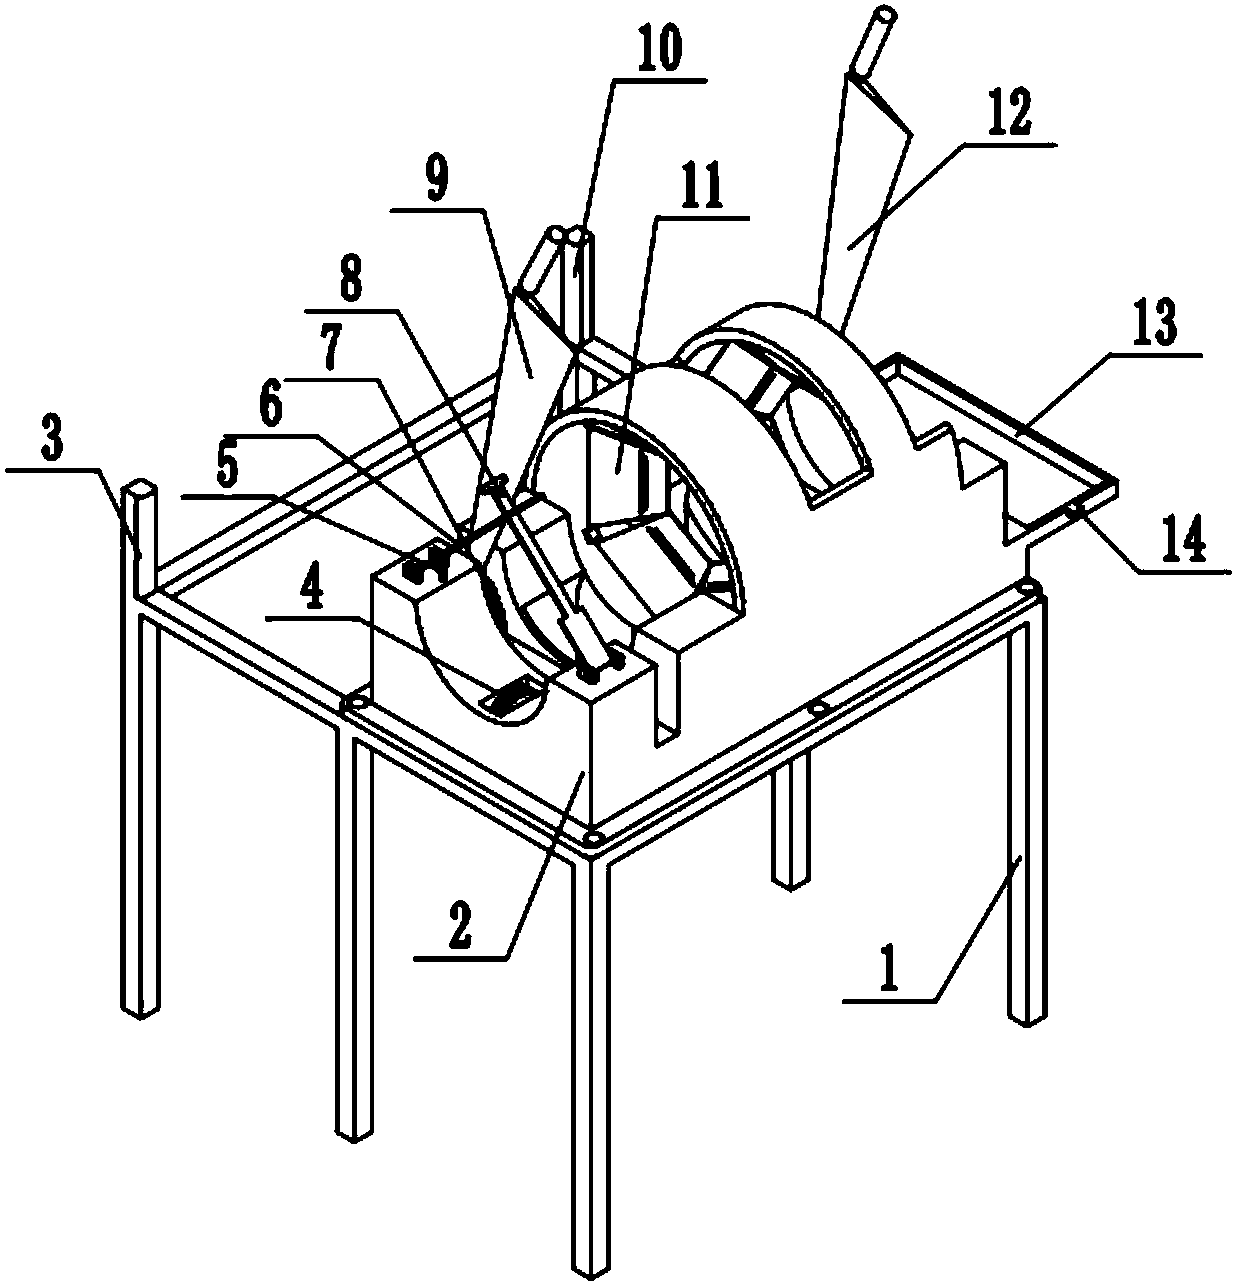 Sugarcane peeling and section cutting device